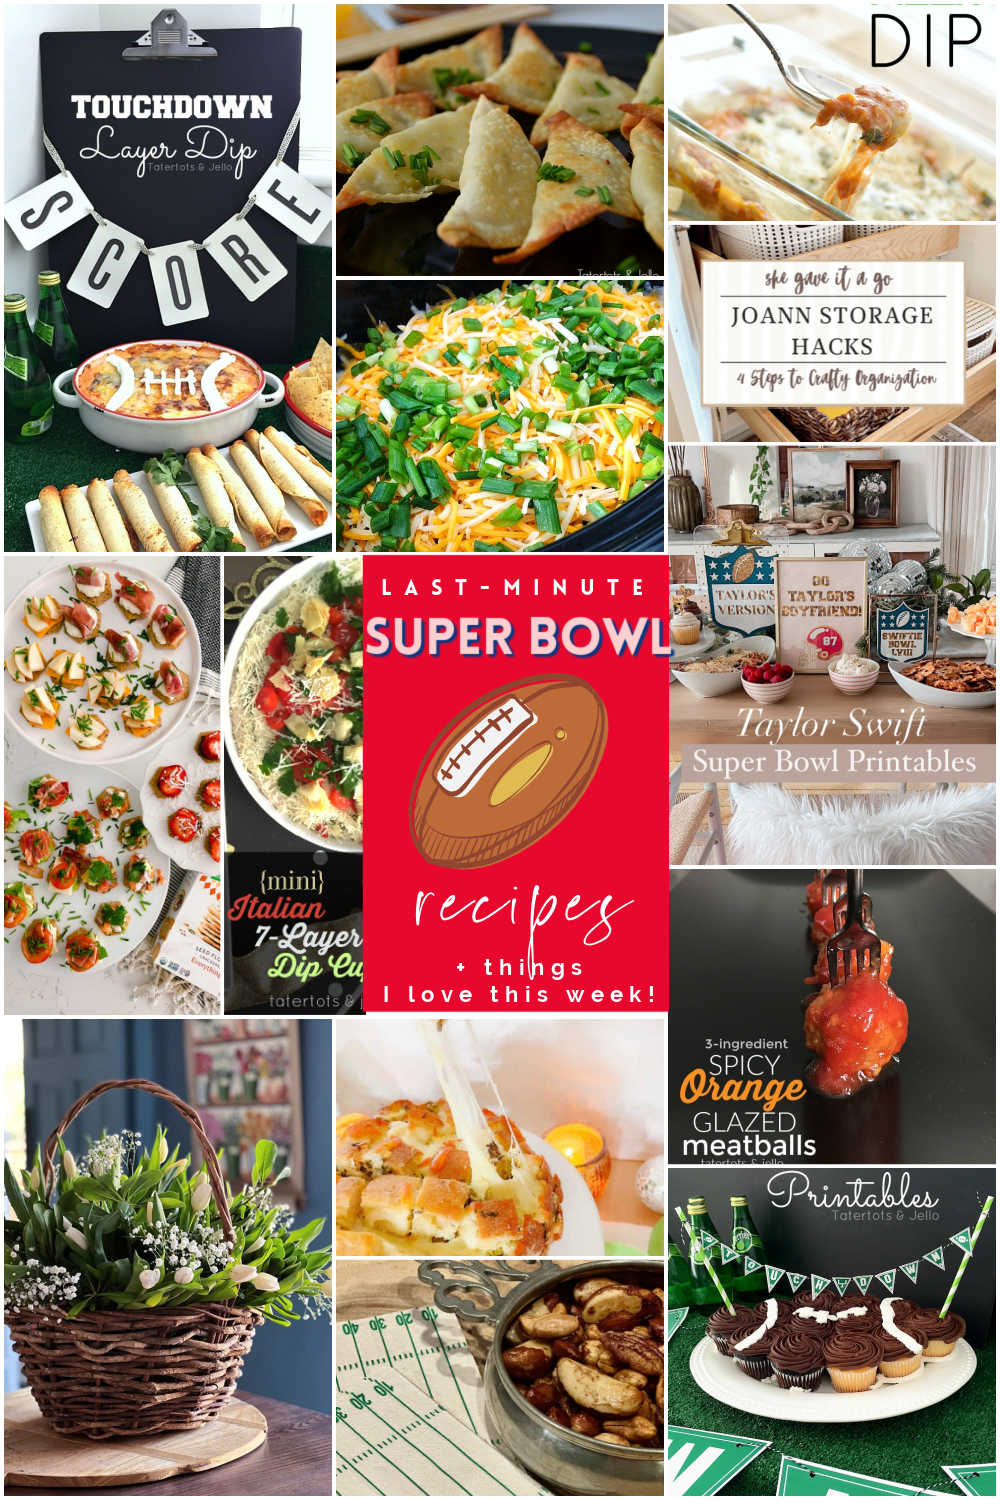 Last-Minute Super Bowl Recipes and Things I Love This Week! Discover a winning lineup of Super Bowl recipes, from crispy Baked Herb Cheese Ravioli to cheesy Pizza Dip, for a game-day spread that'll impress your guests.